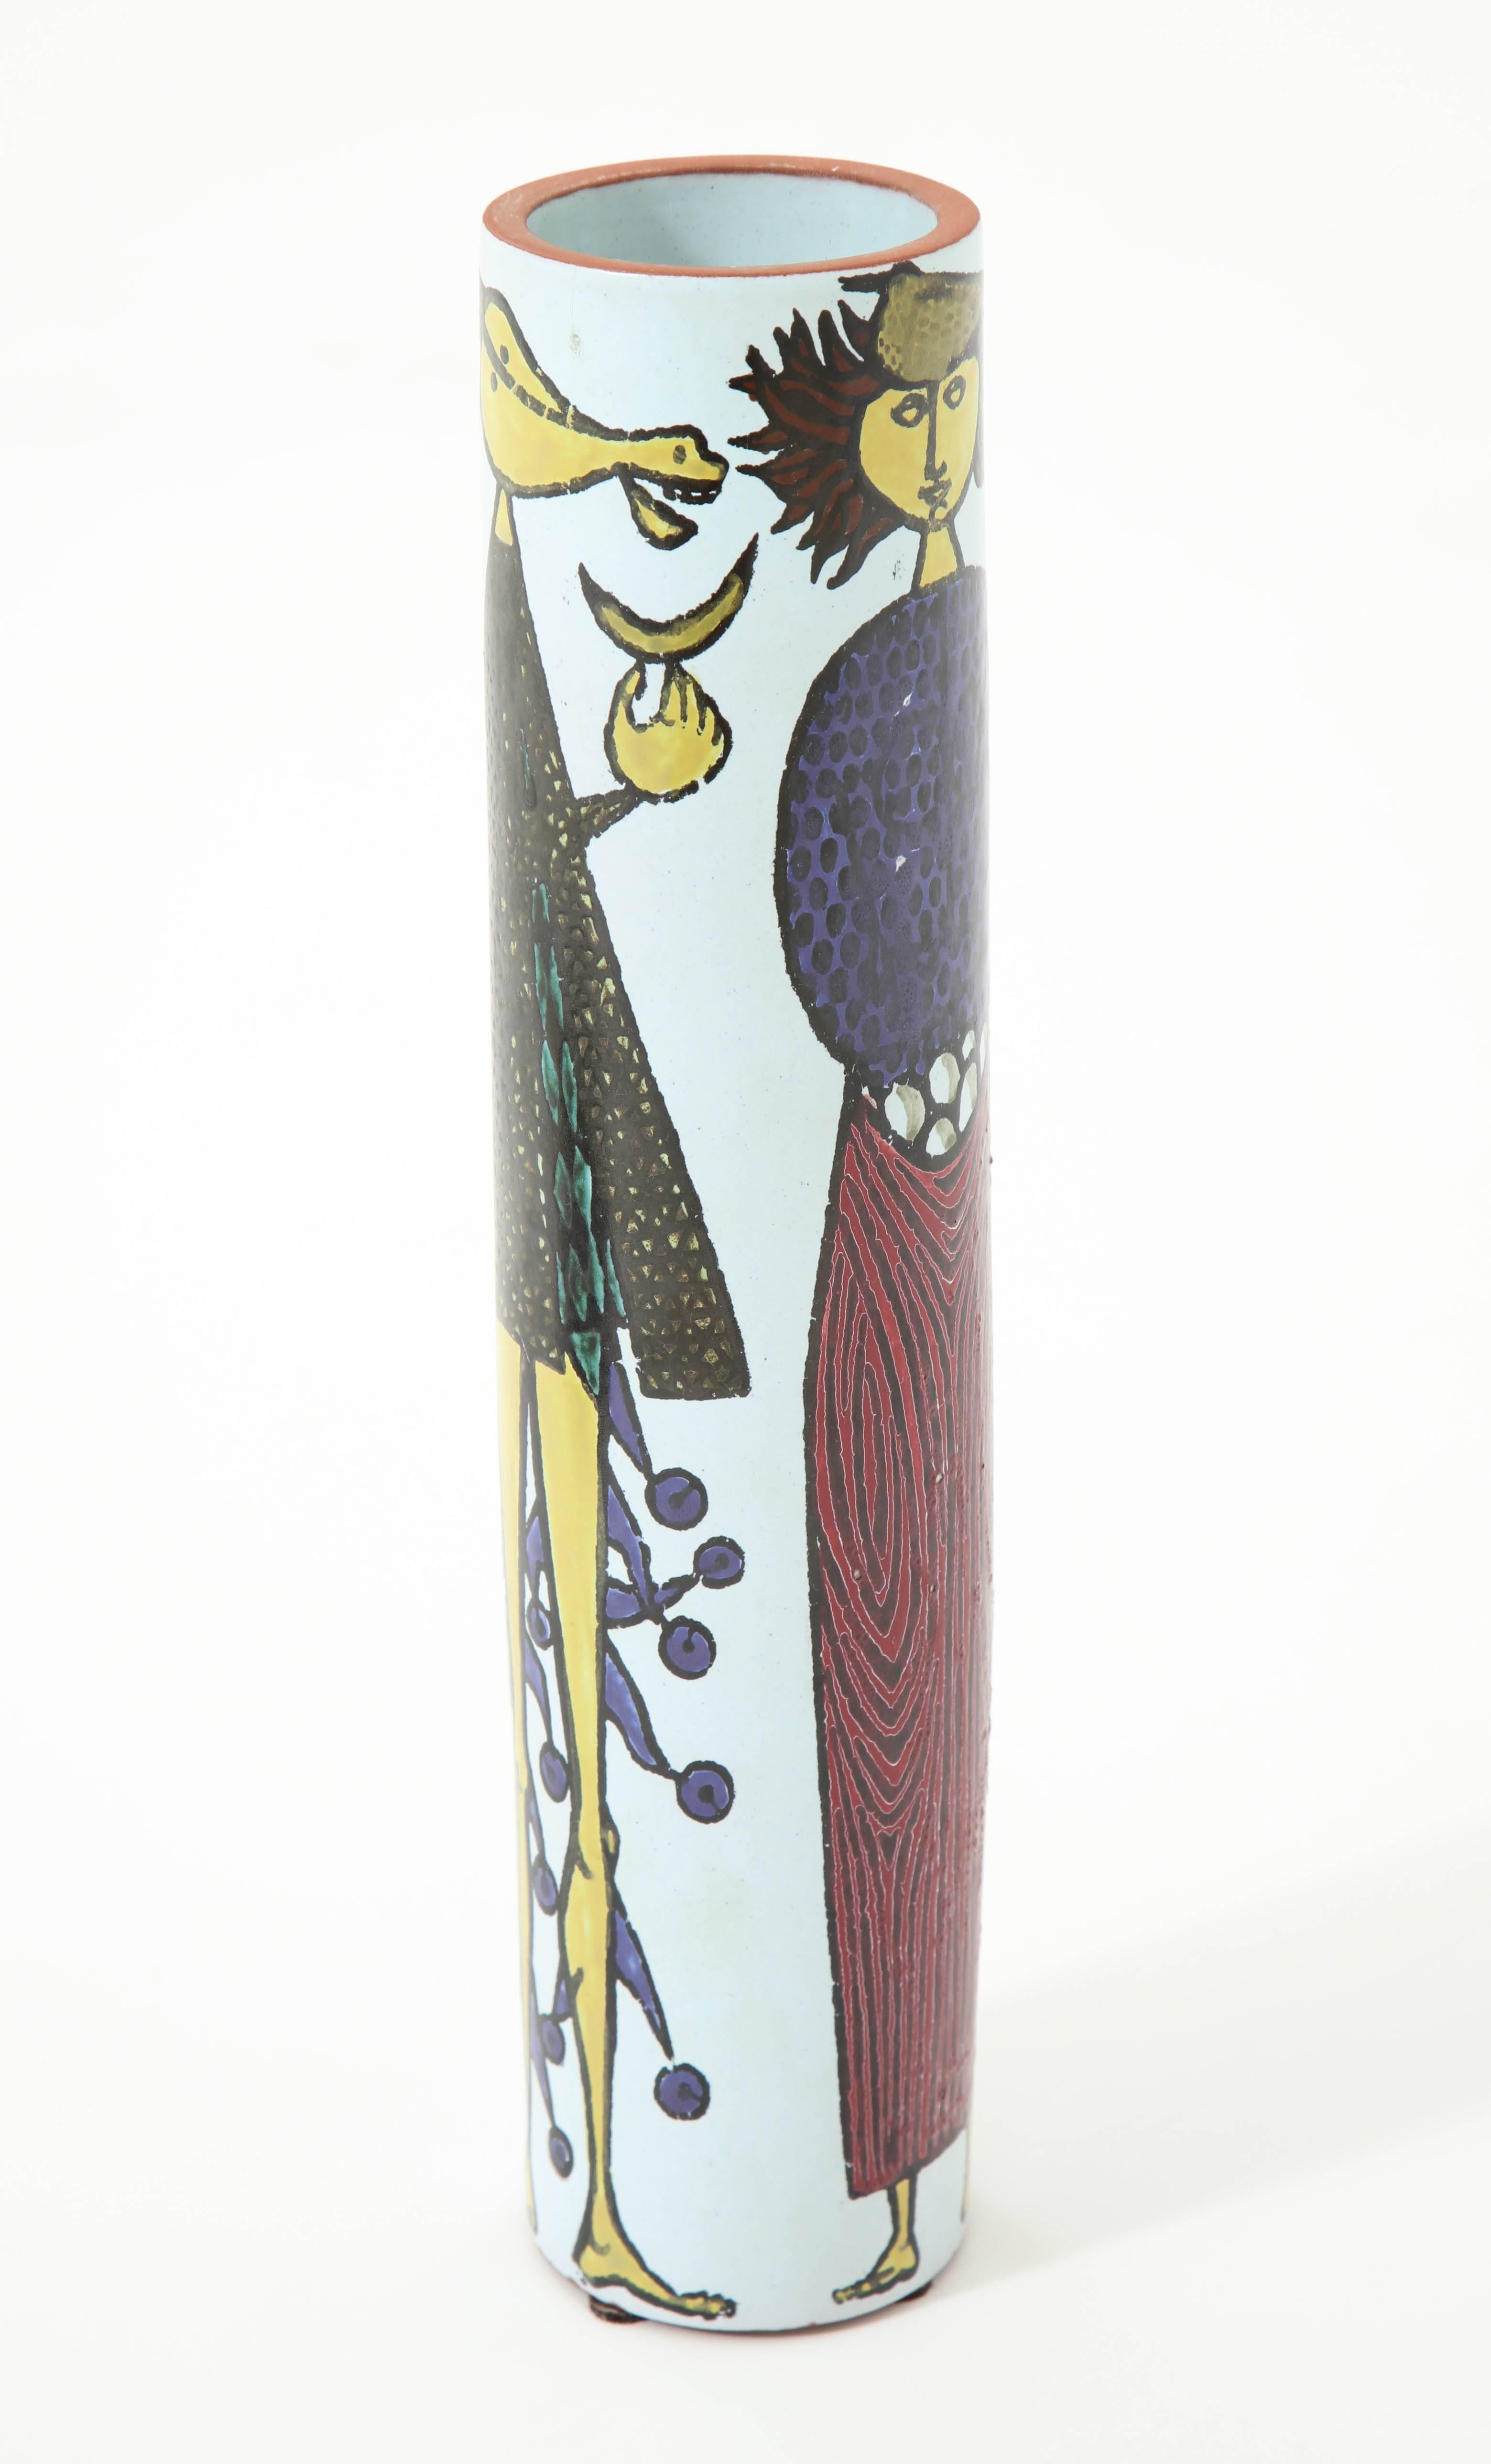 Decorative tall, Mid-Century Modern art ceramic vase by Stig Lindberg, Sweden, circa 1950.
An artistic jack-of-all-trades, Stig Lindberg was accomplished in Industrial design, textile design, painting, illustration, glassblowing and ceramics. His